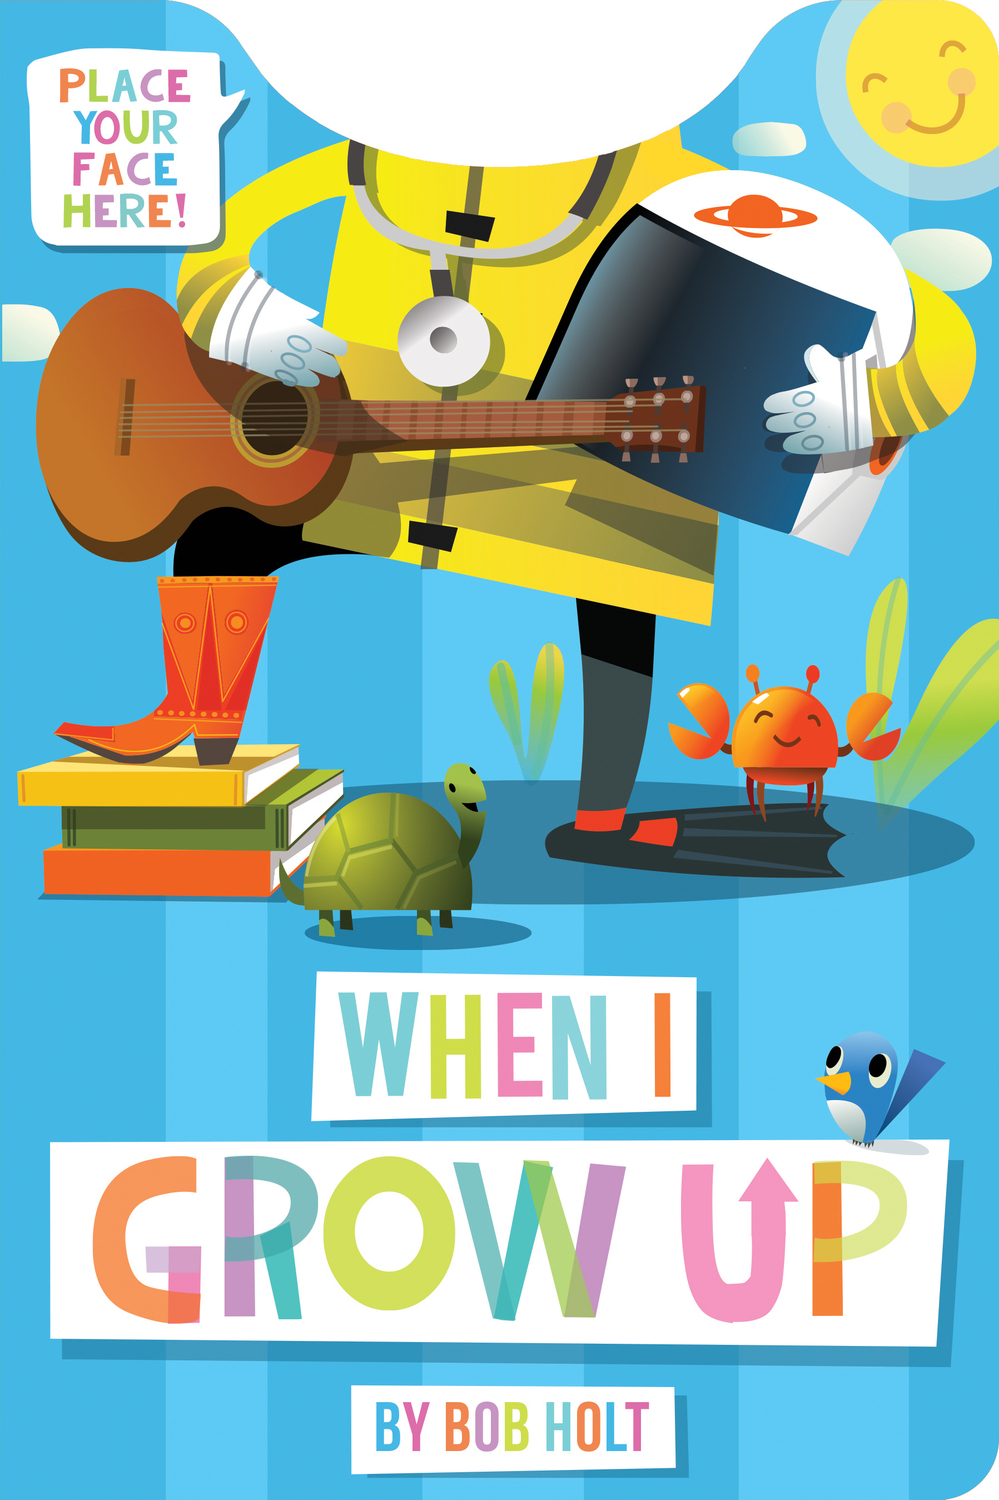 When I Grow Up (shaped board book)